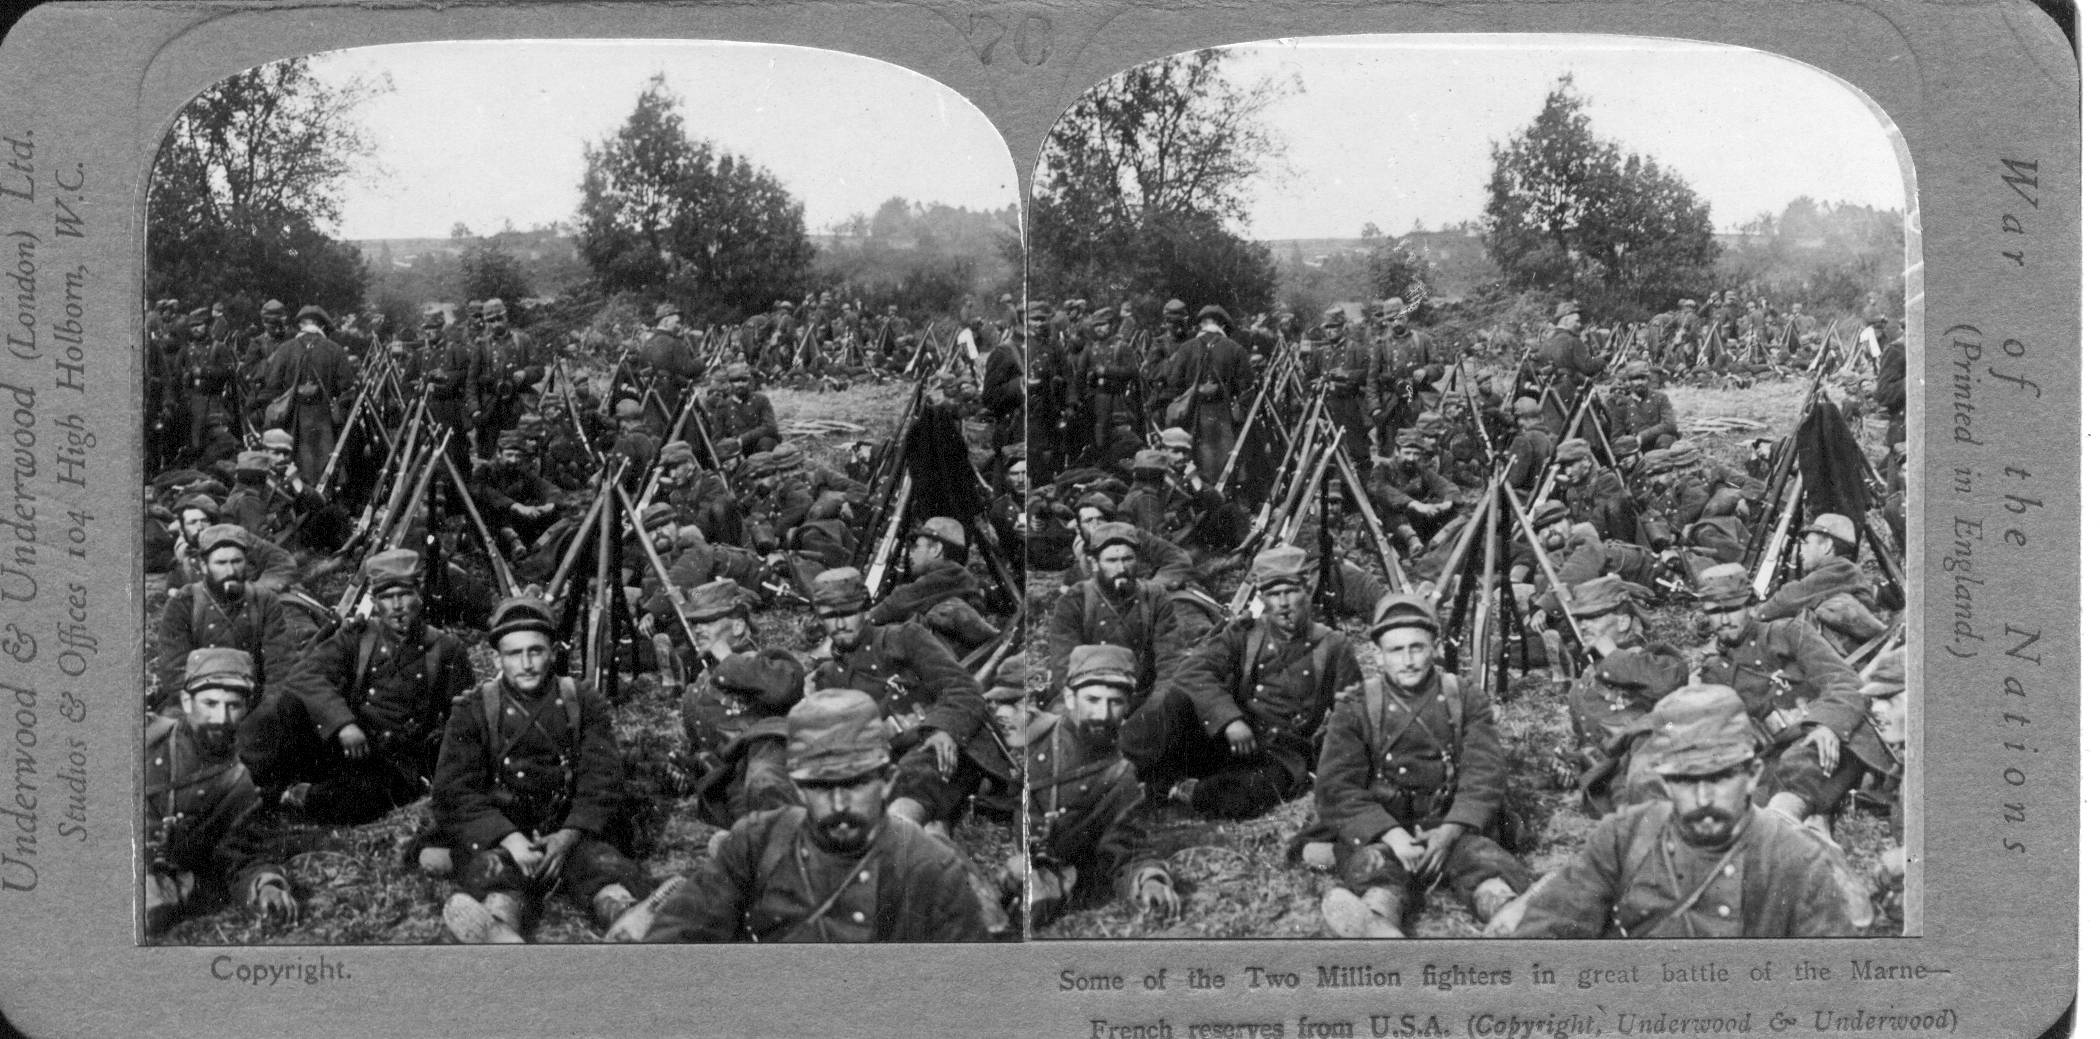 Some of the Two Million fighters in great battle of the Marne--French reserves from the U.S.A.